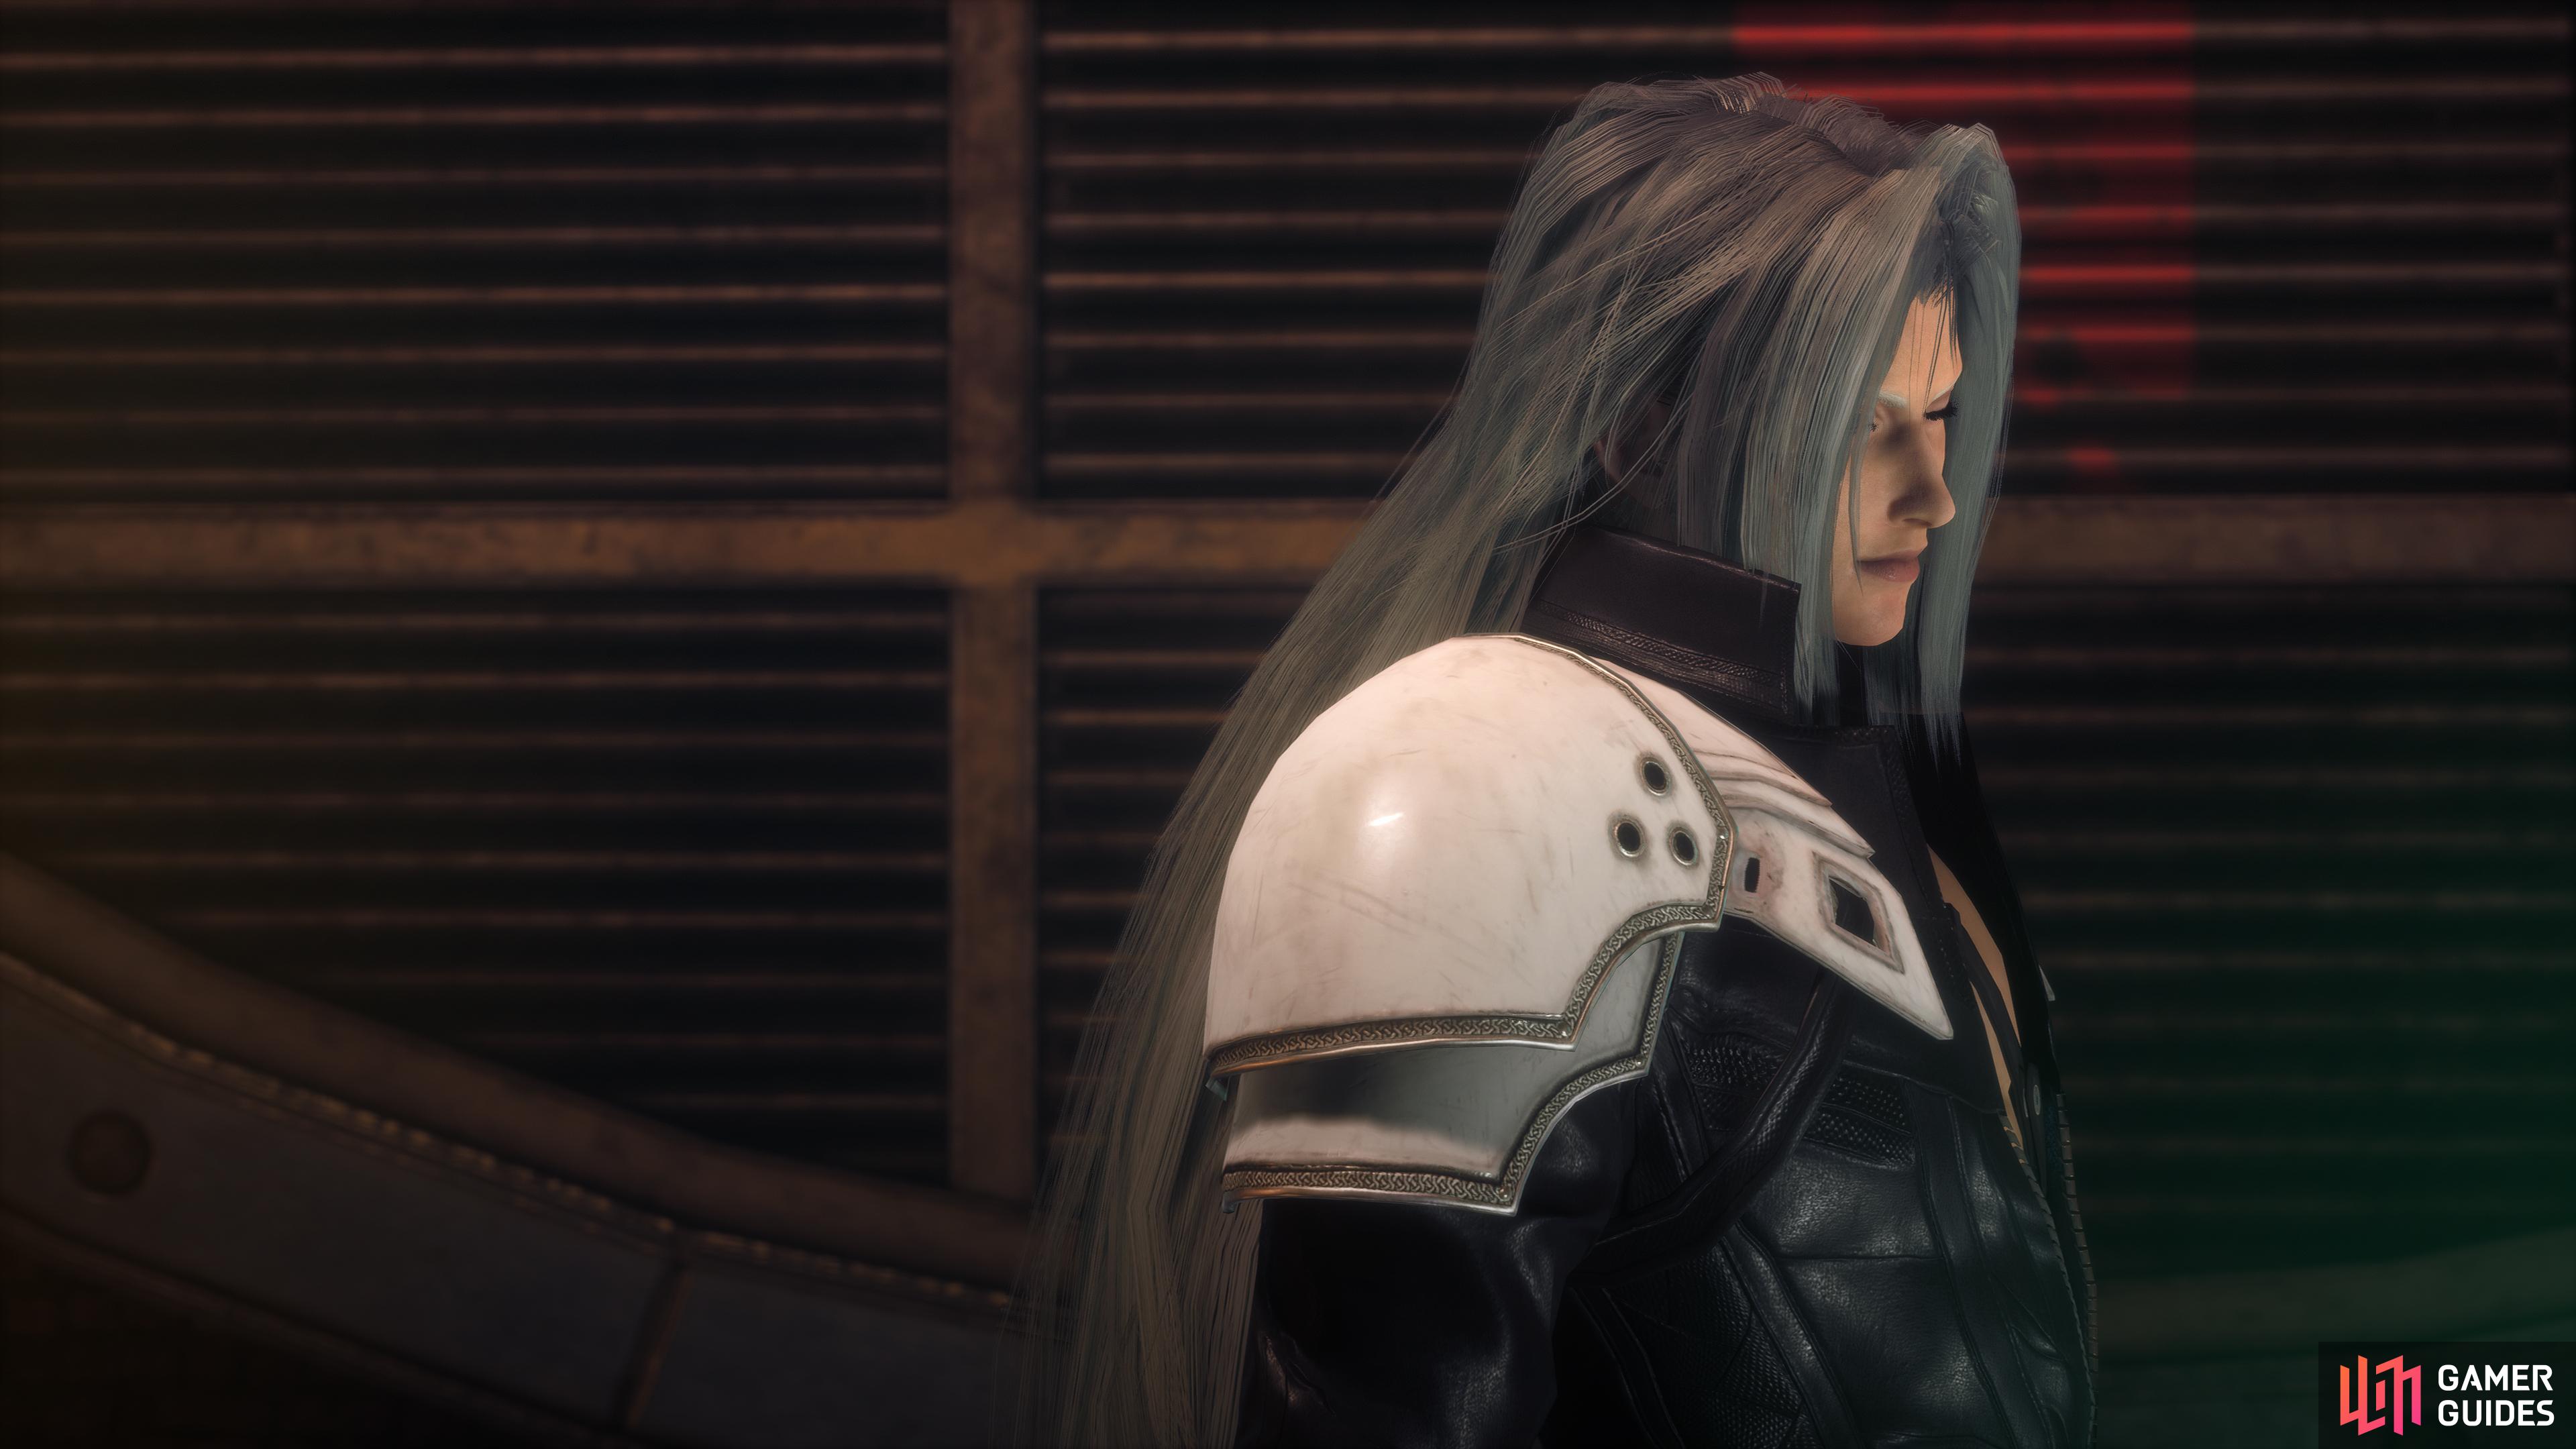 you can expect to learn more about Sephiroth in this story.